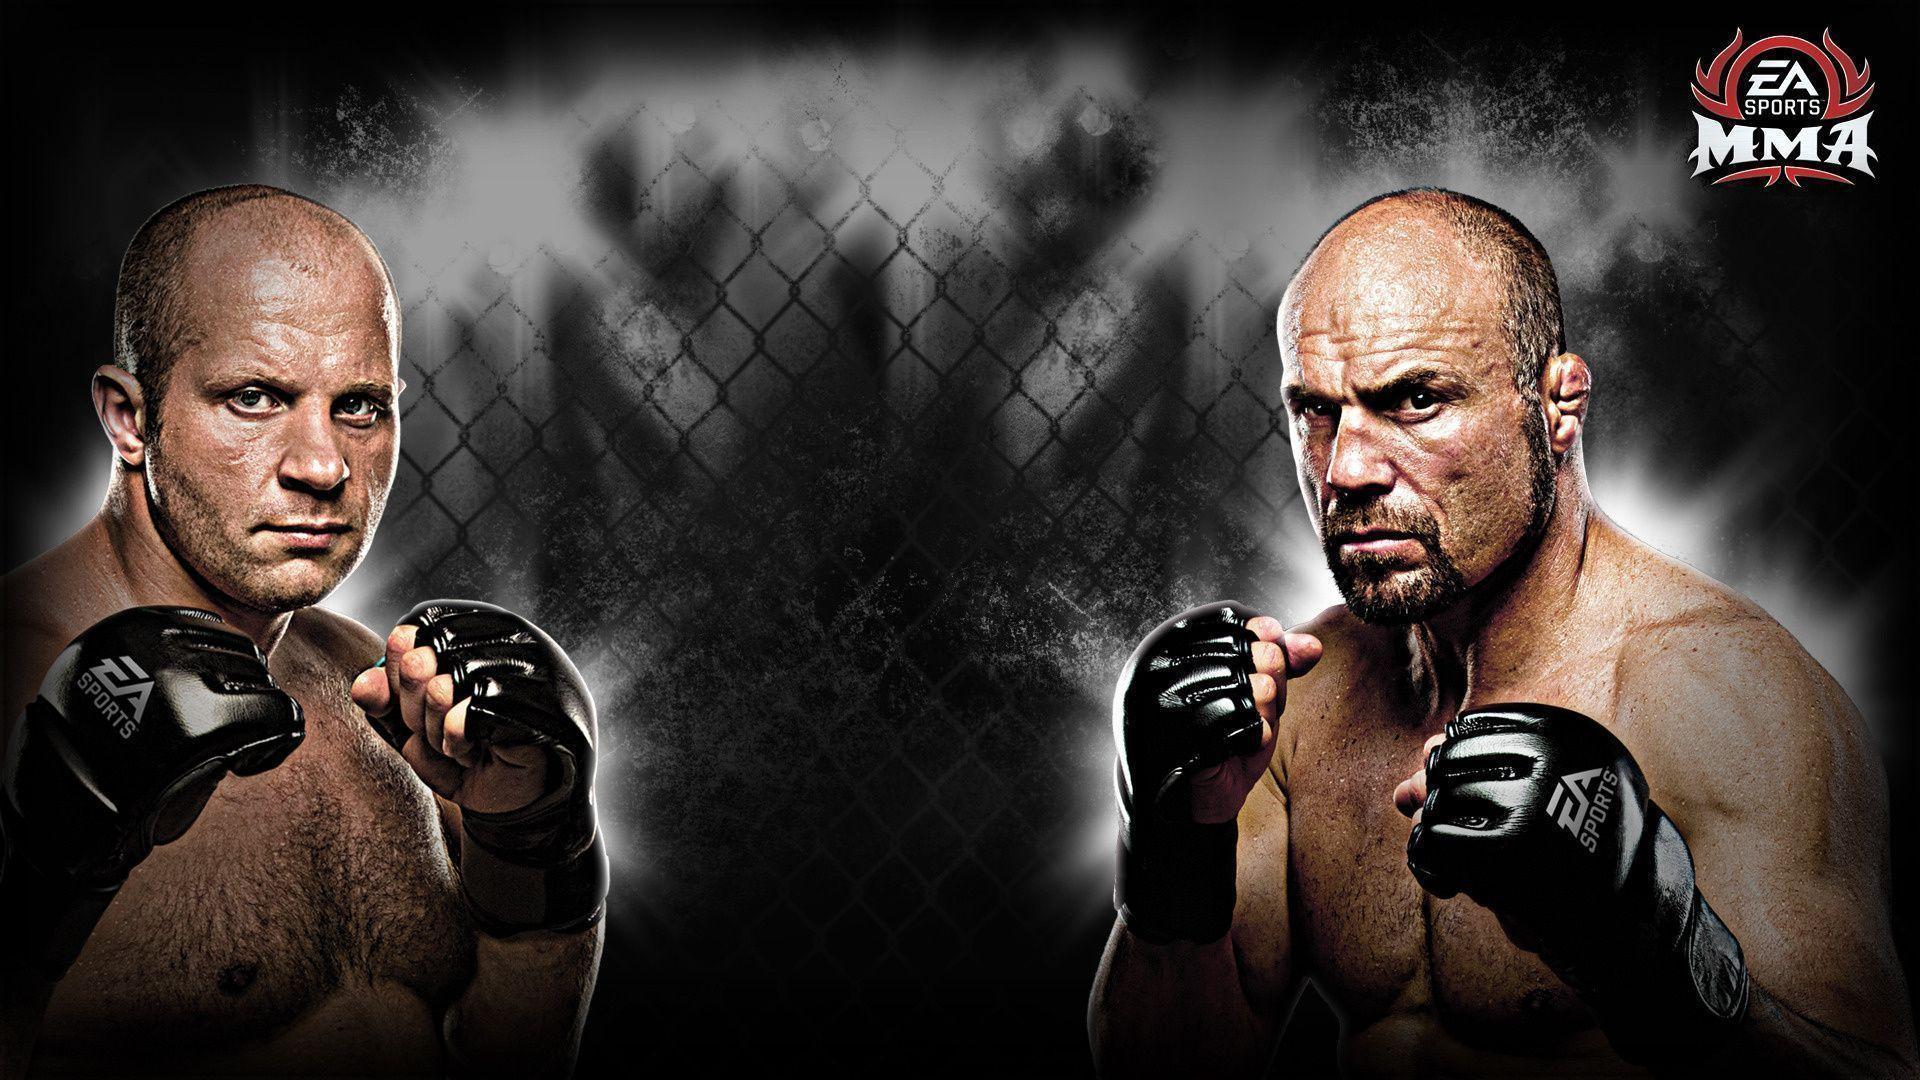 UFC MMA fight wallpaper ready to set as background